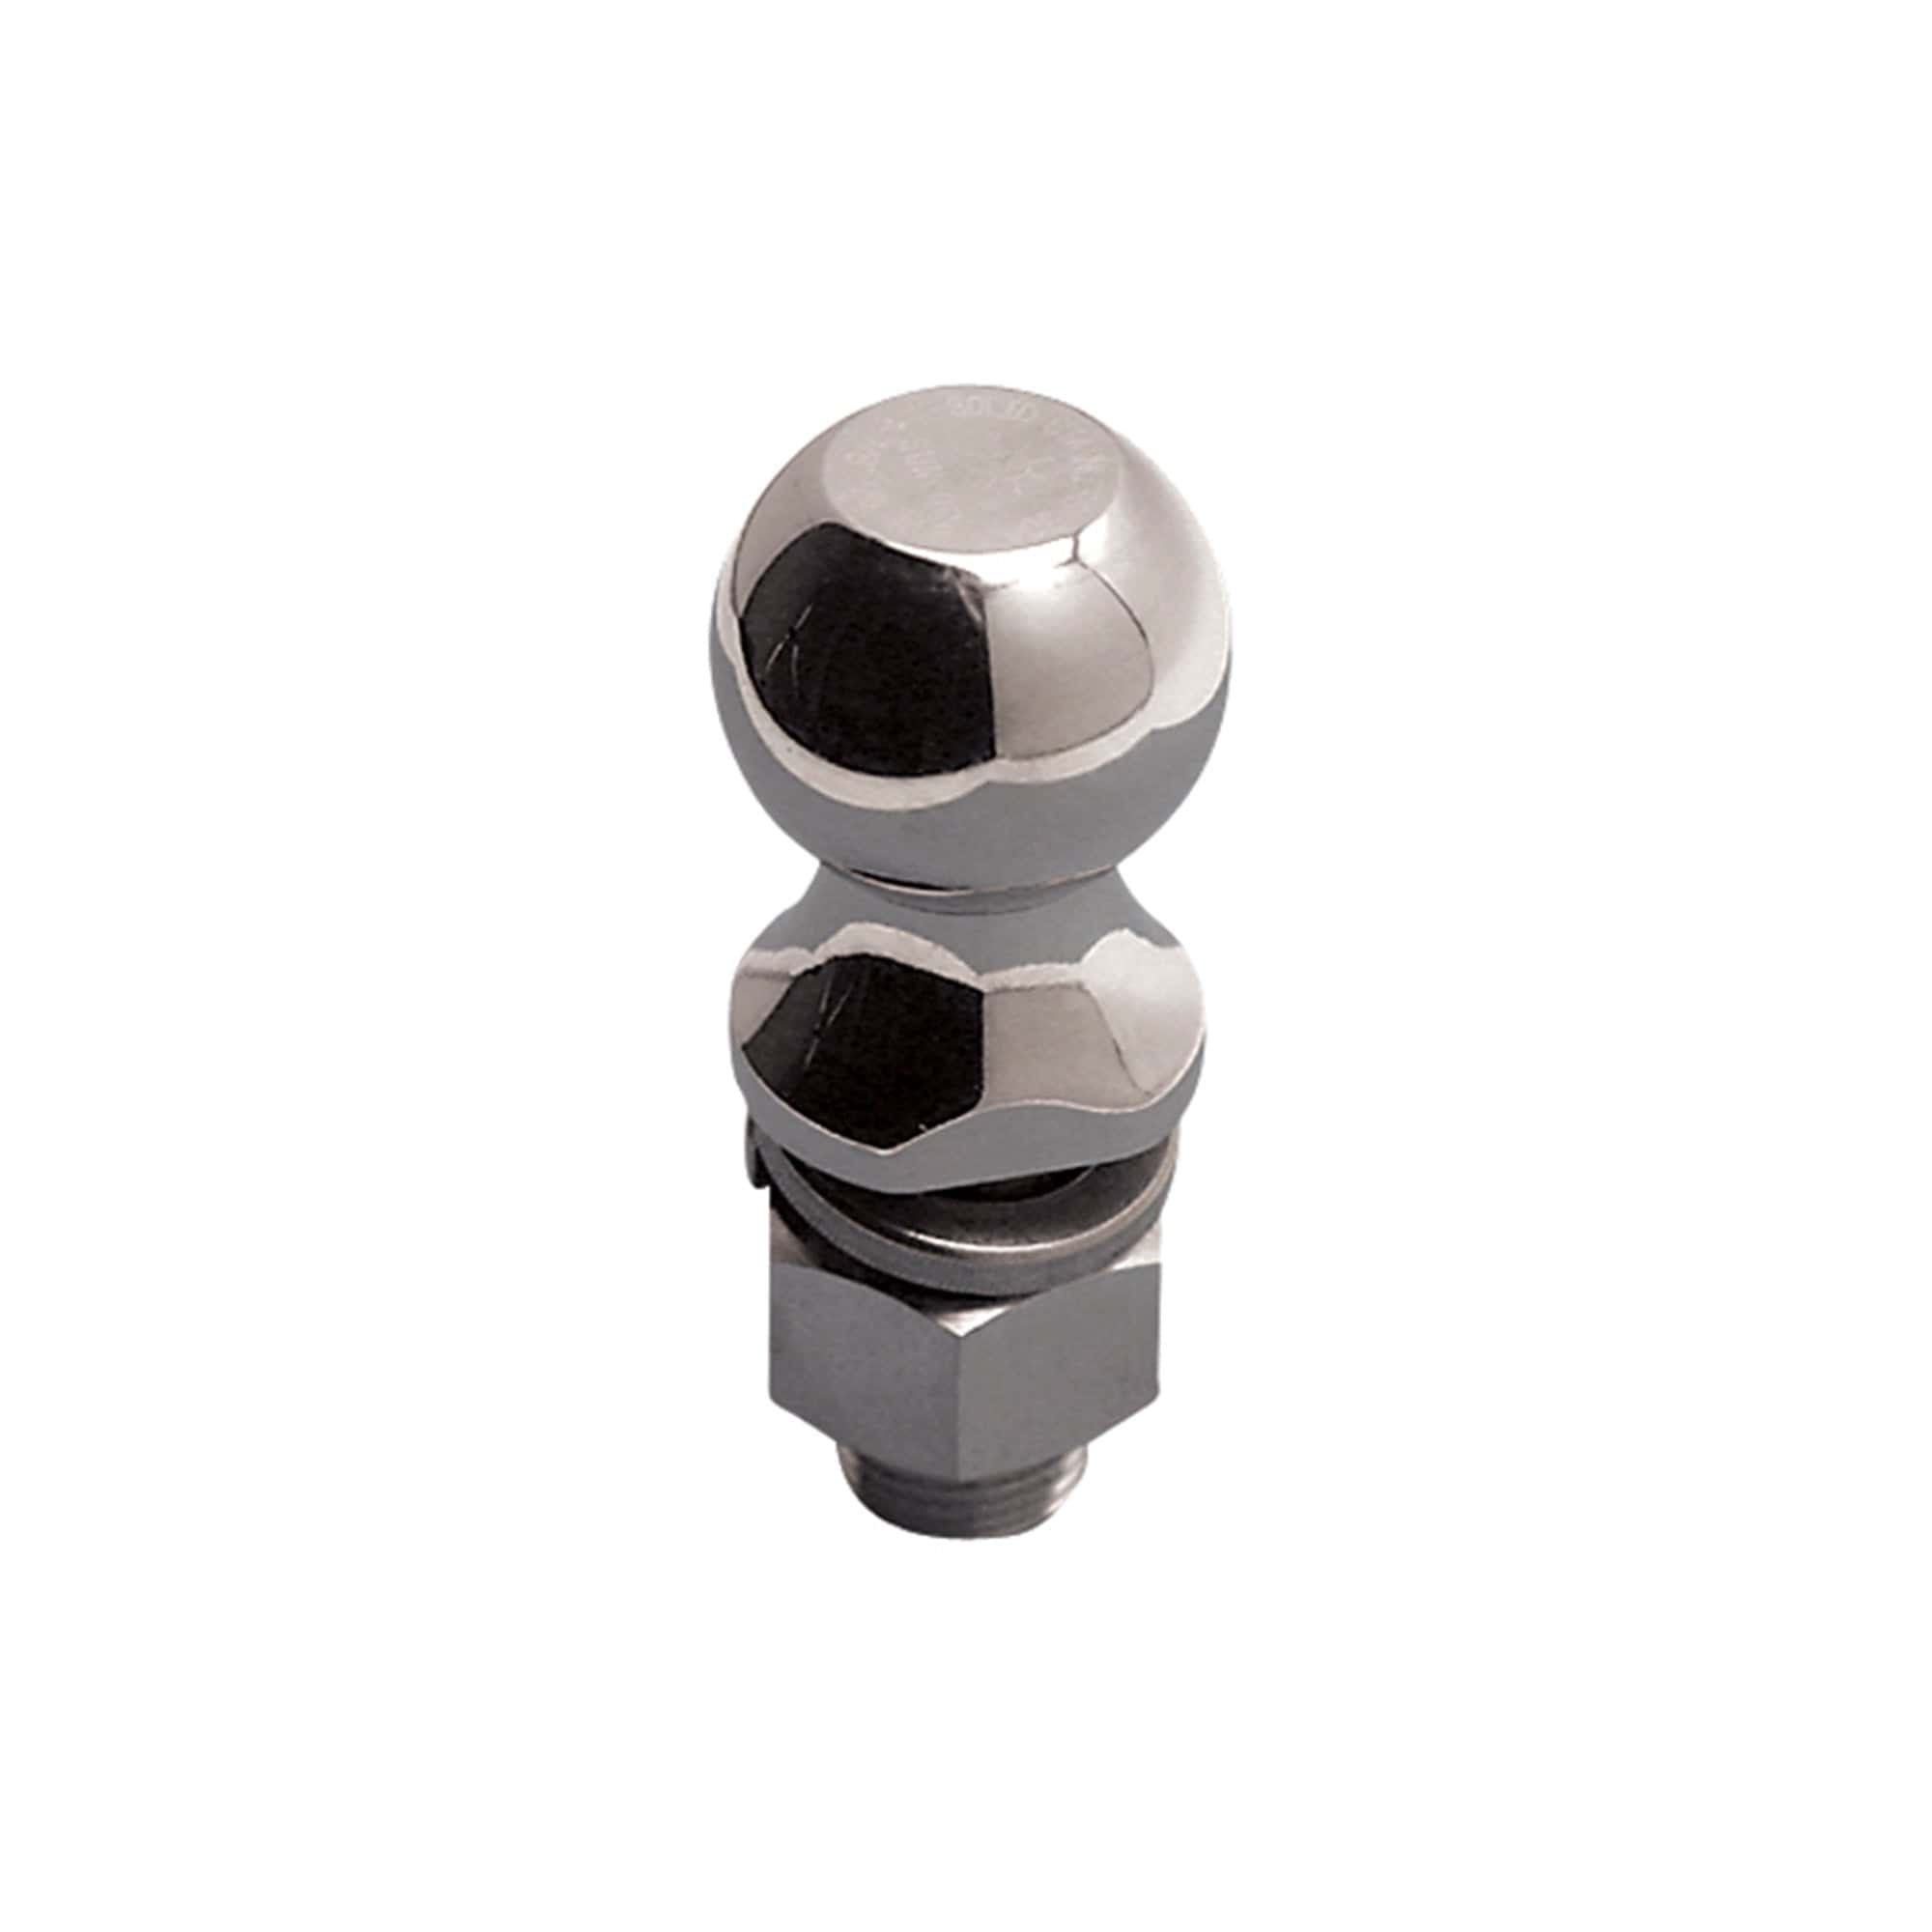 Suncor Stainless C0260-4720 Hitch Ball 1-7/8" X 3/4", 304 SS